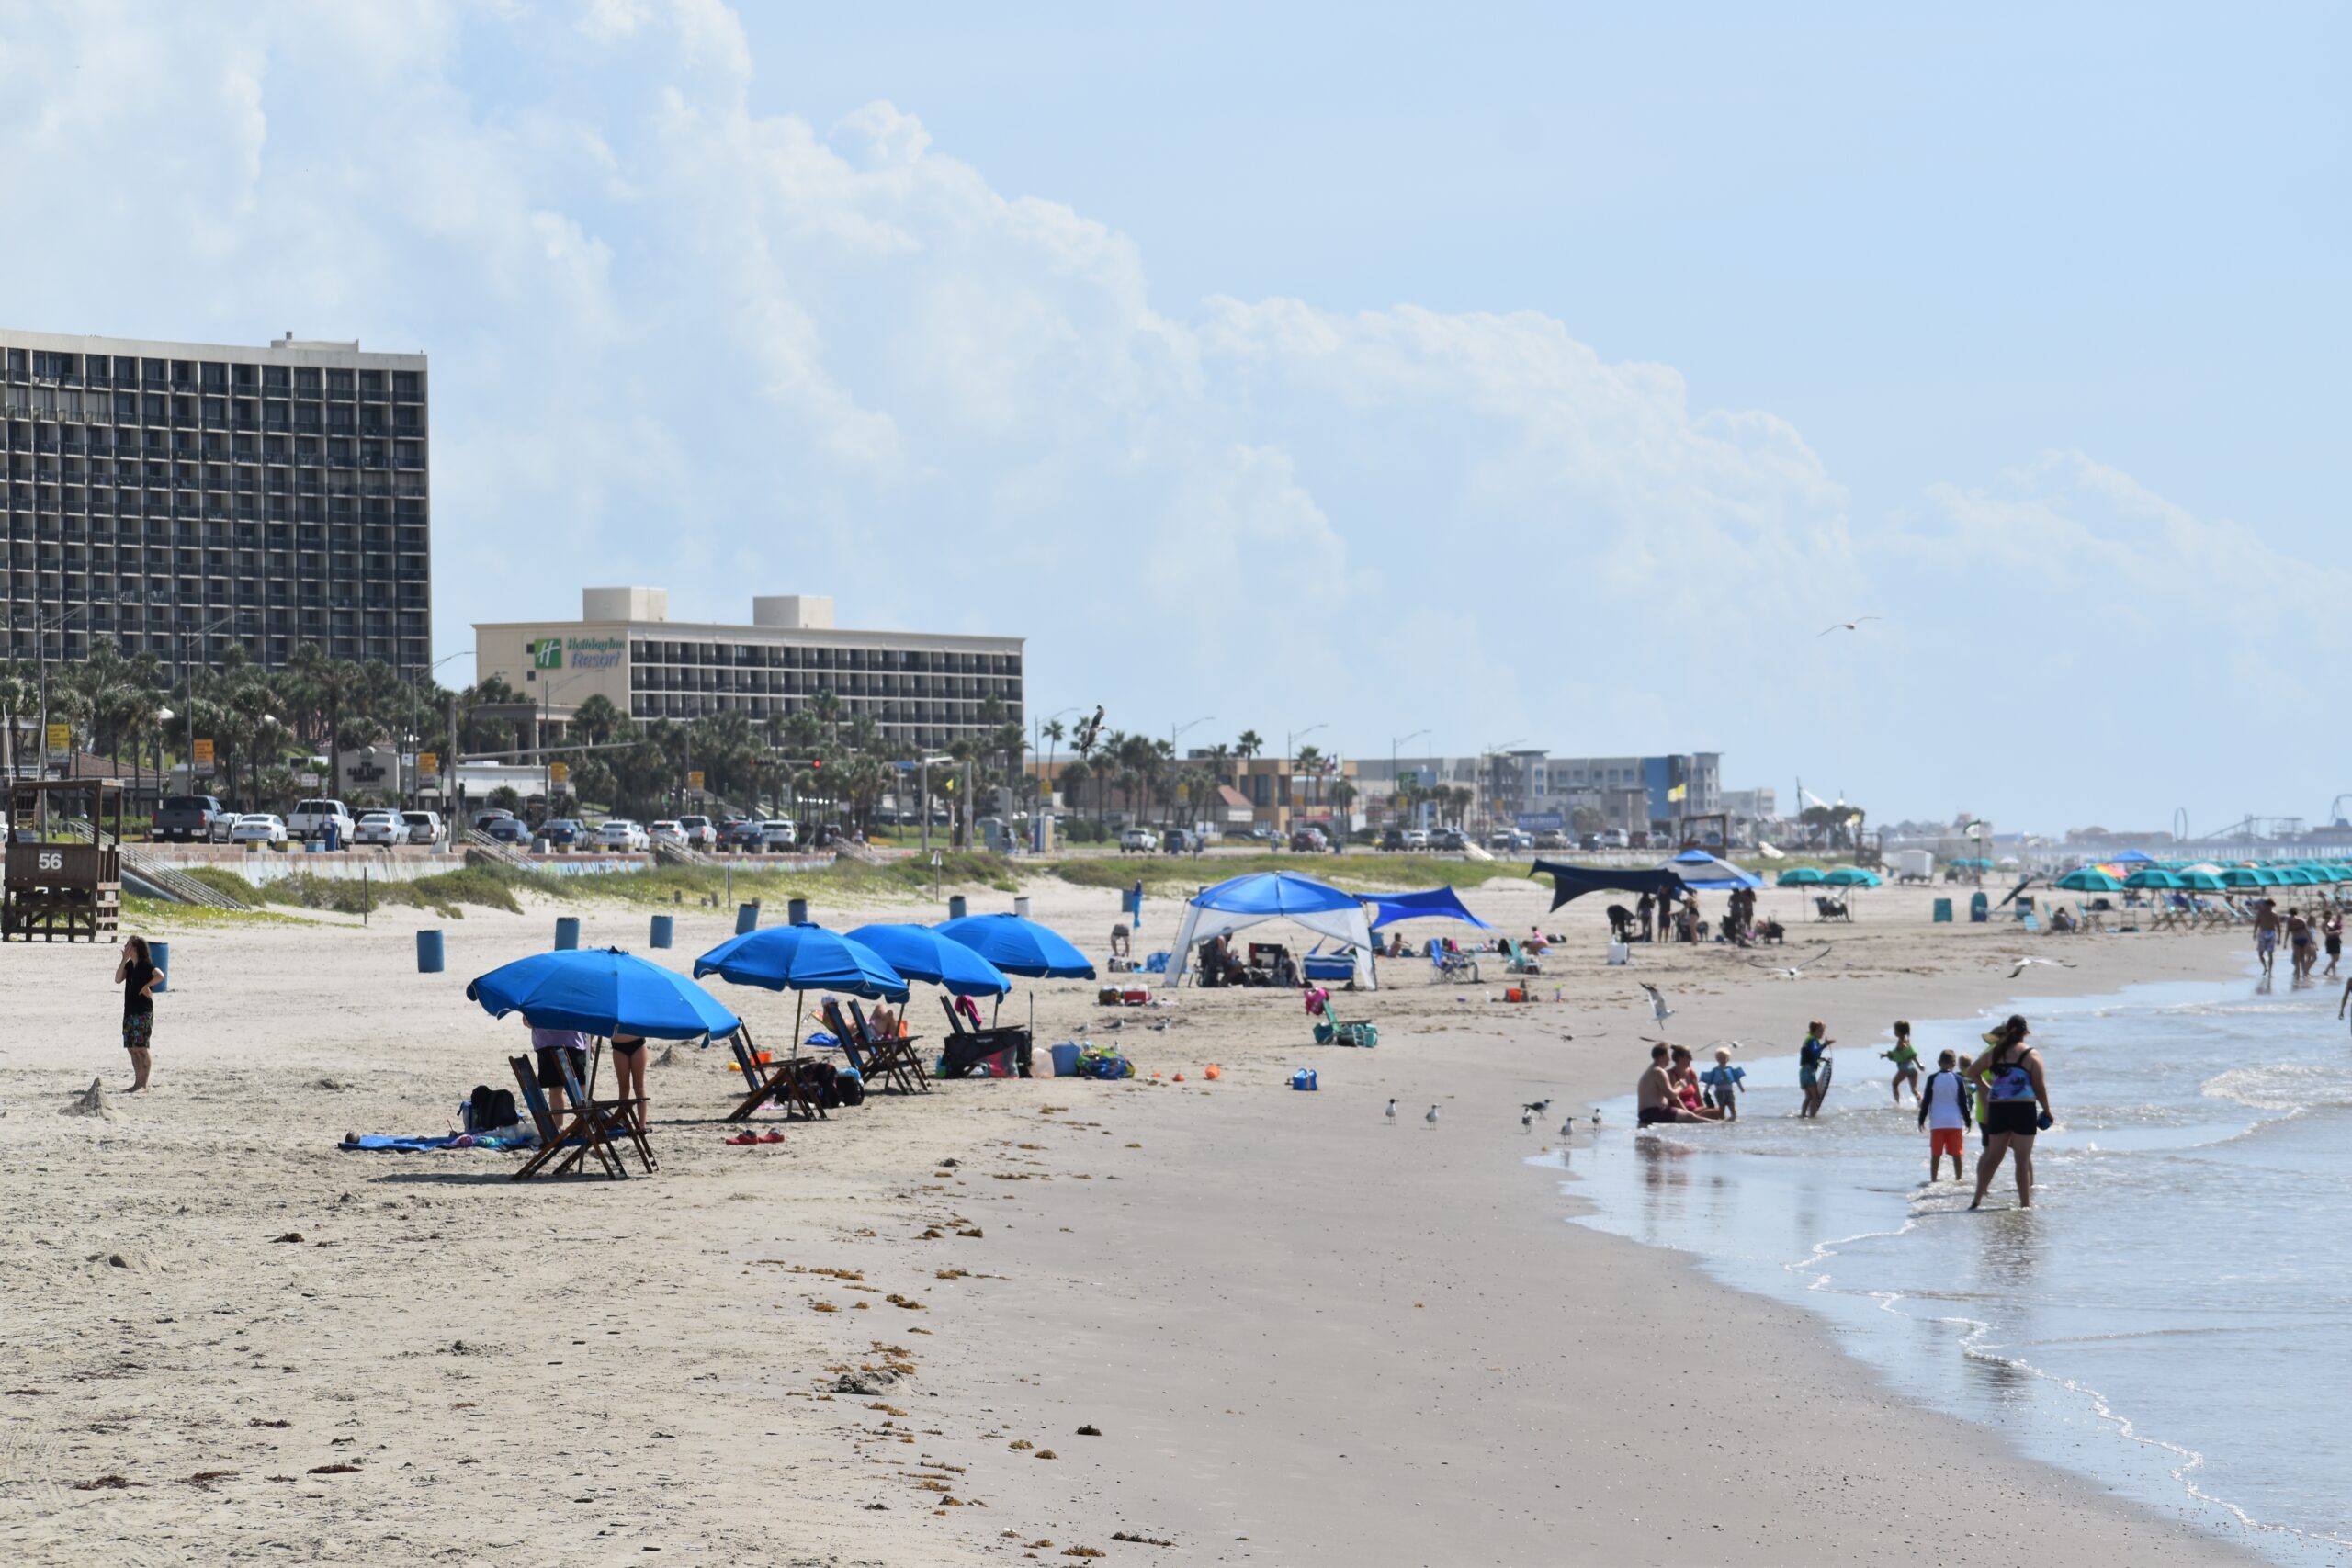 August summer in Galveston during a record-breaking heat wave. Beach goers cool off under rented umbrellas or in the ocean, with the beachfront hotels in the backdrop.